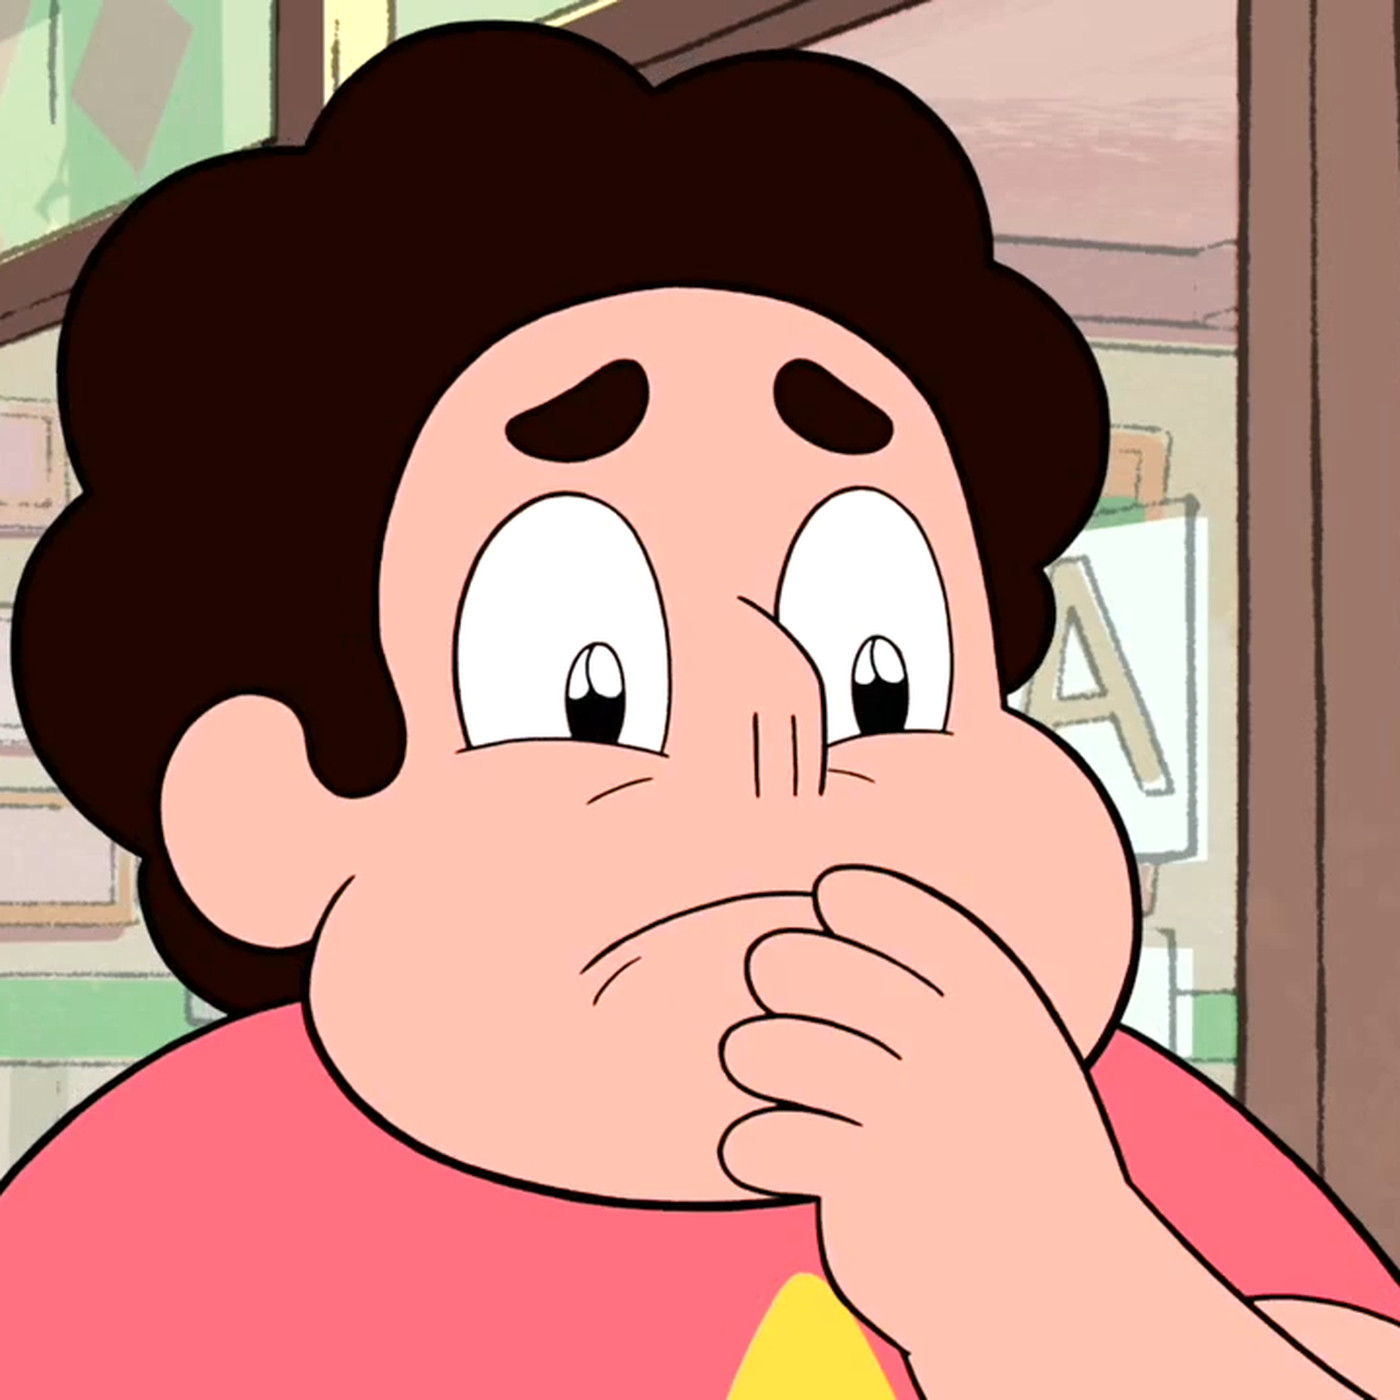 Leaked' Steven Universe episodes weren't leaked at all, Cartoon Network  says - Polygon